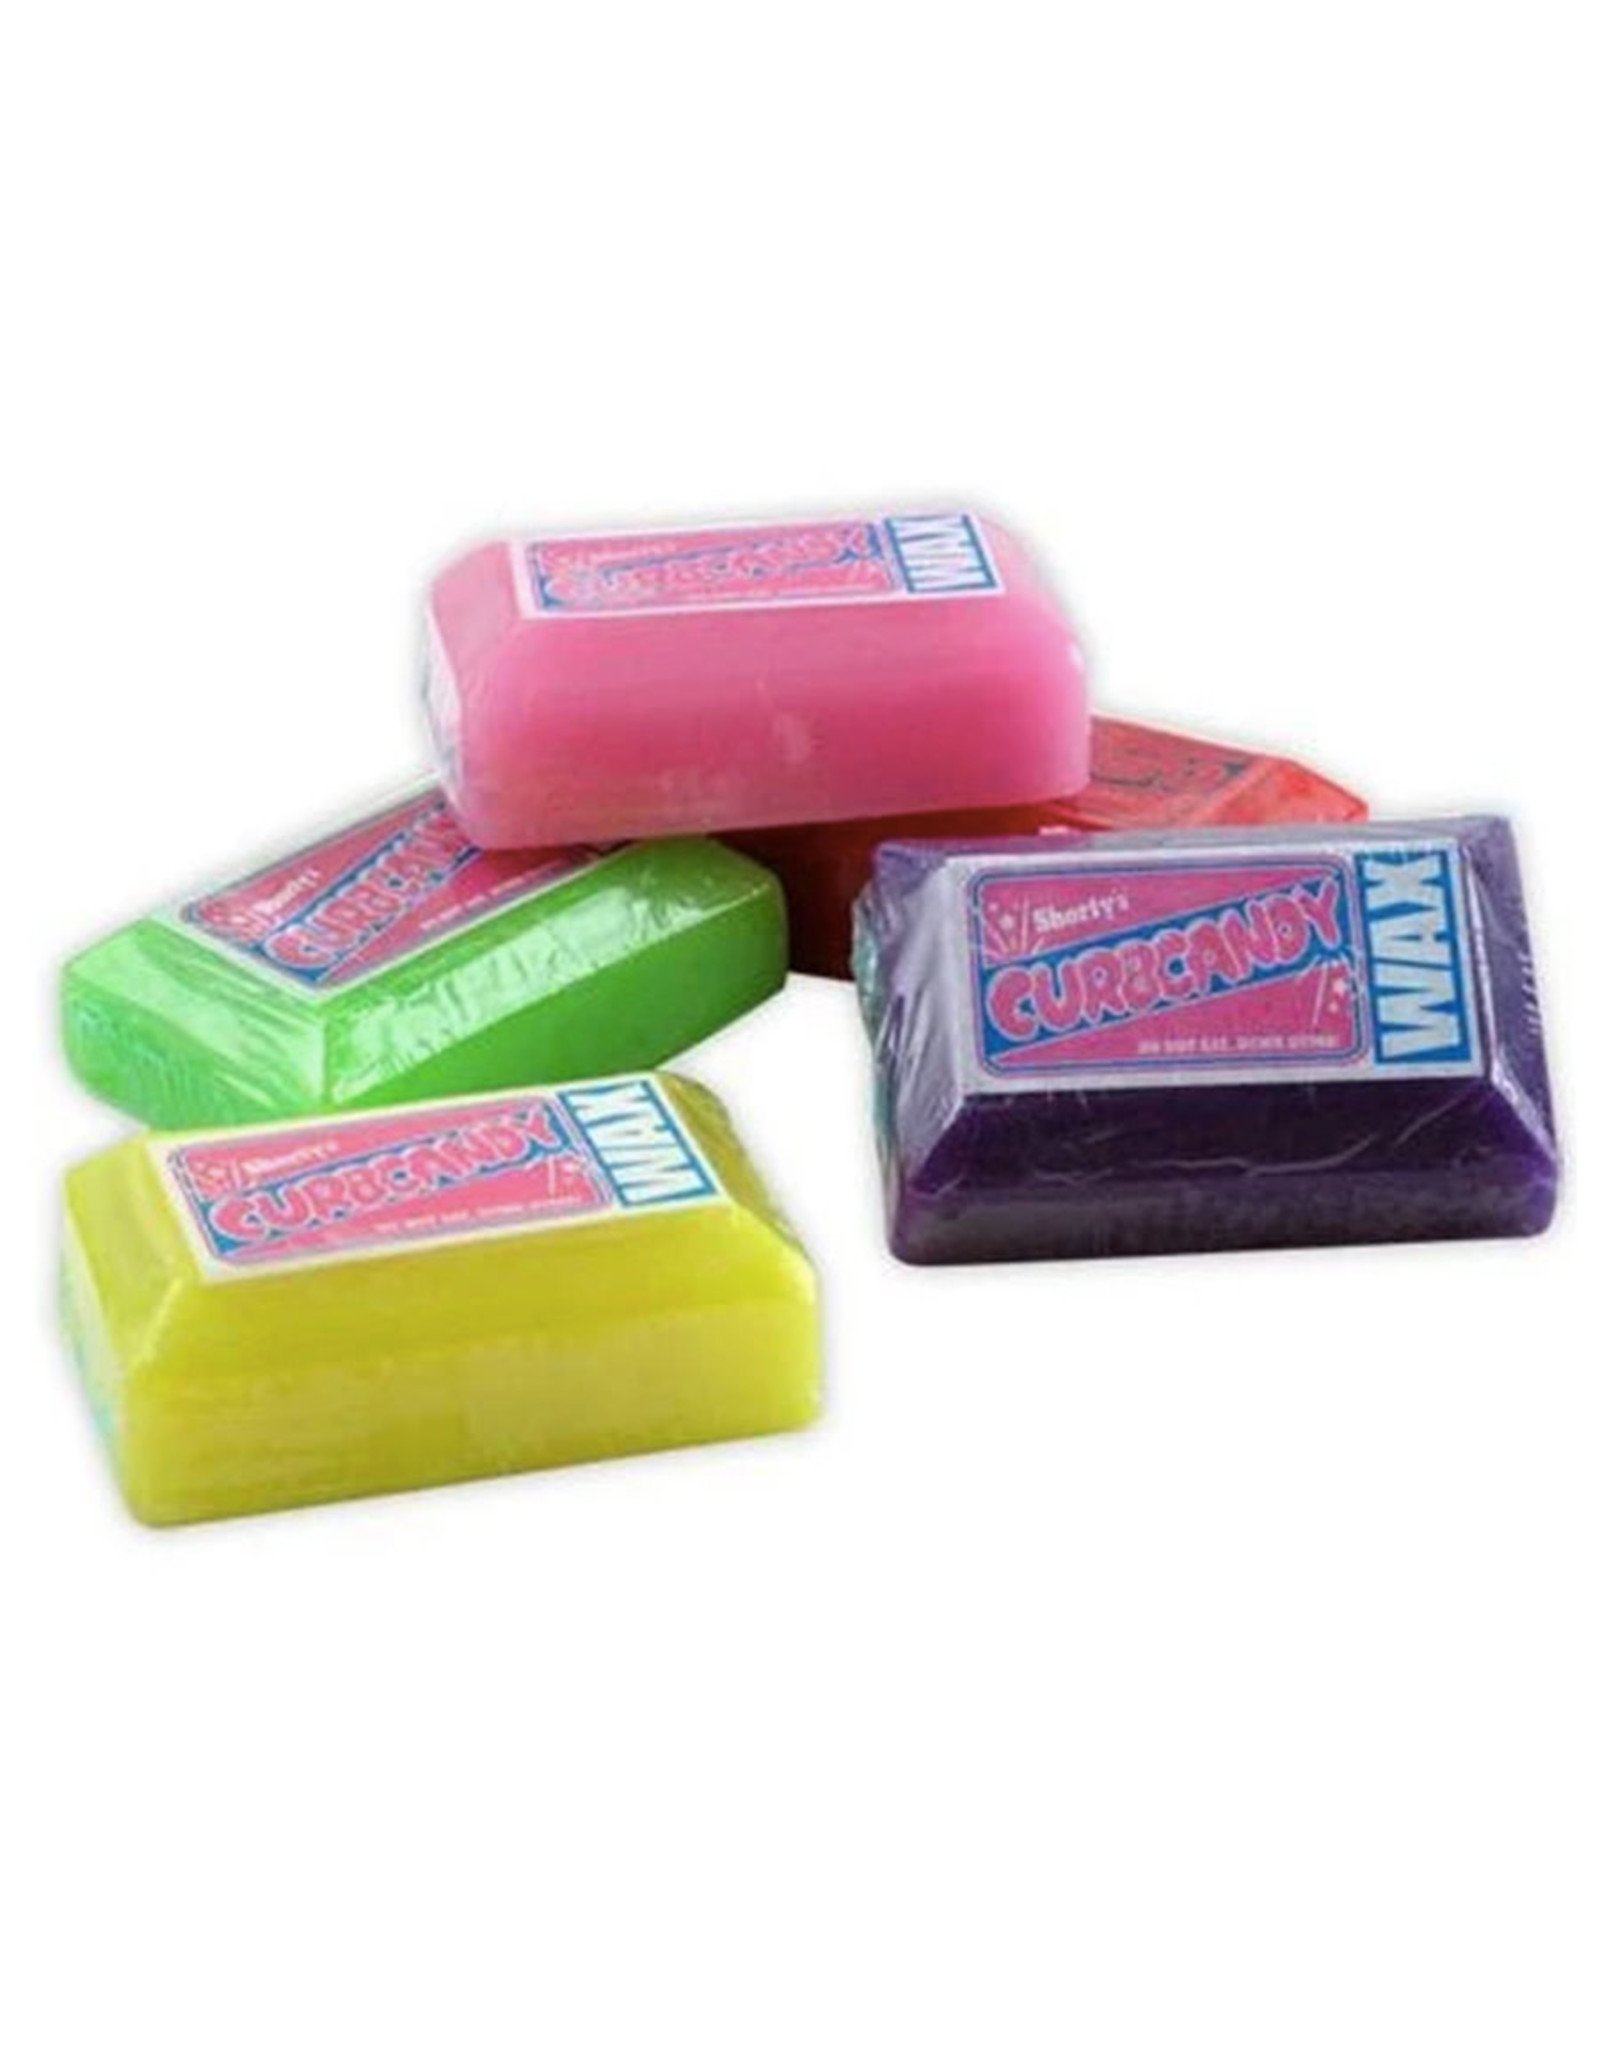 Shorty's Shortys Wax Curb Candy (Assorted)